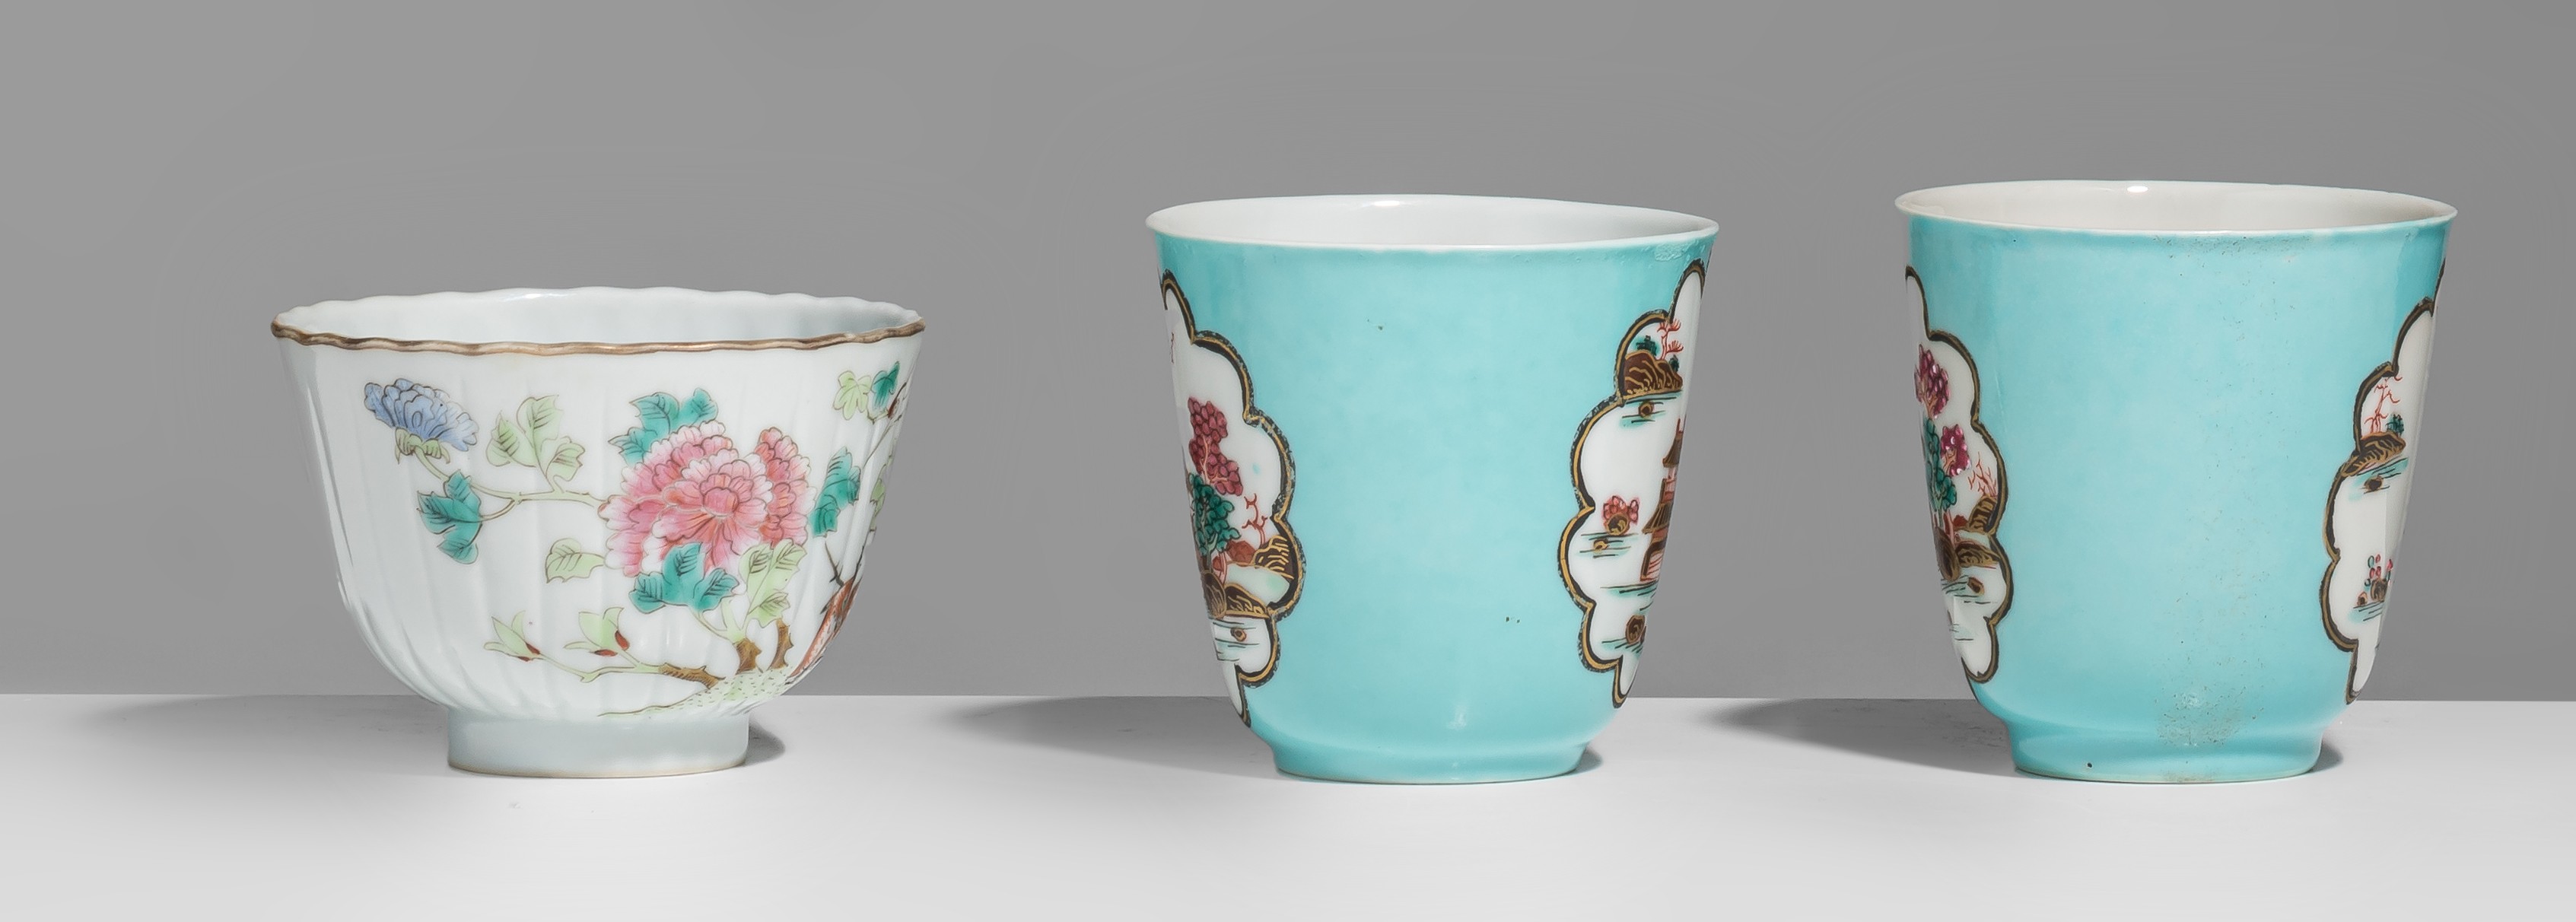 Two rare sets of Meissen-inspired Chinese export porcelain cups and saucers, 18thC, tallest H 7,5 cm - Image 7 of 10